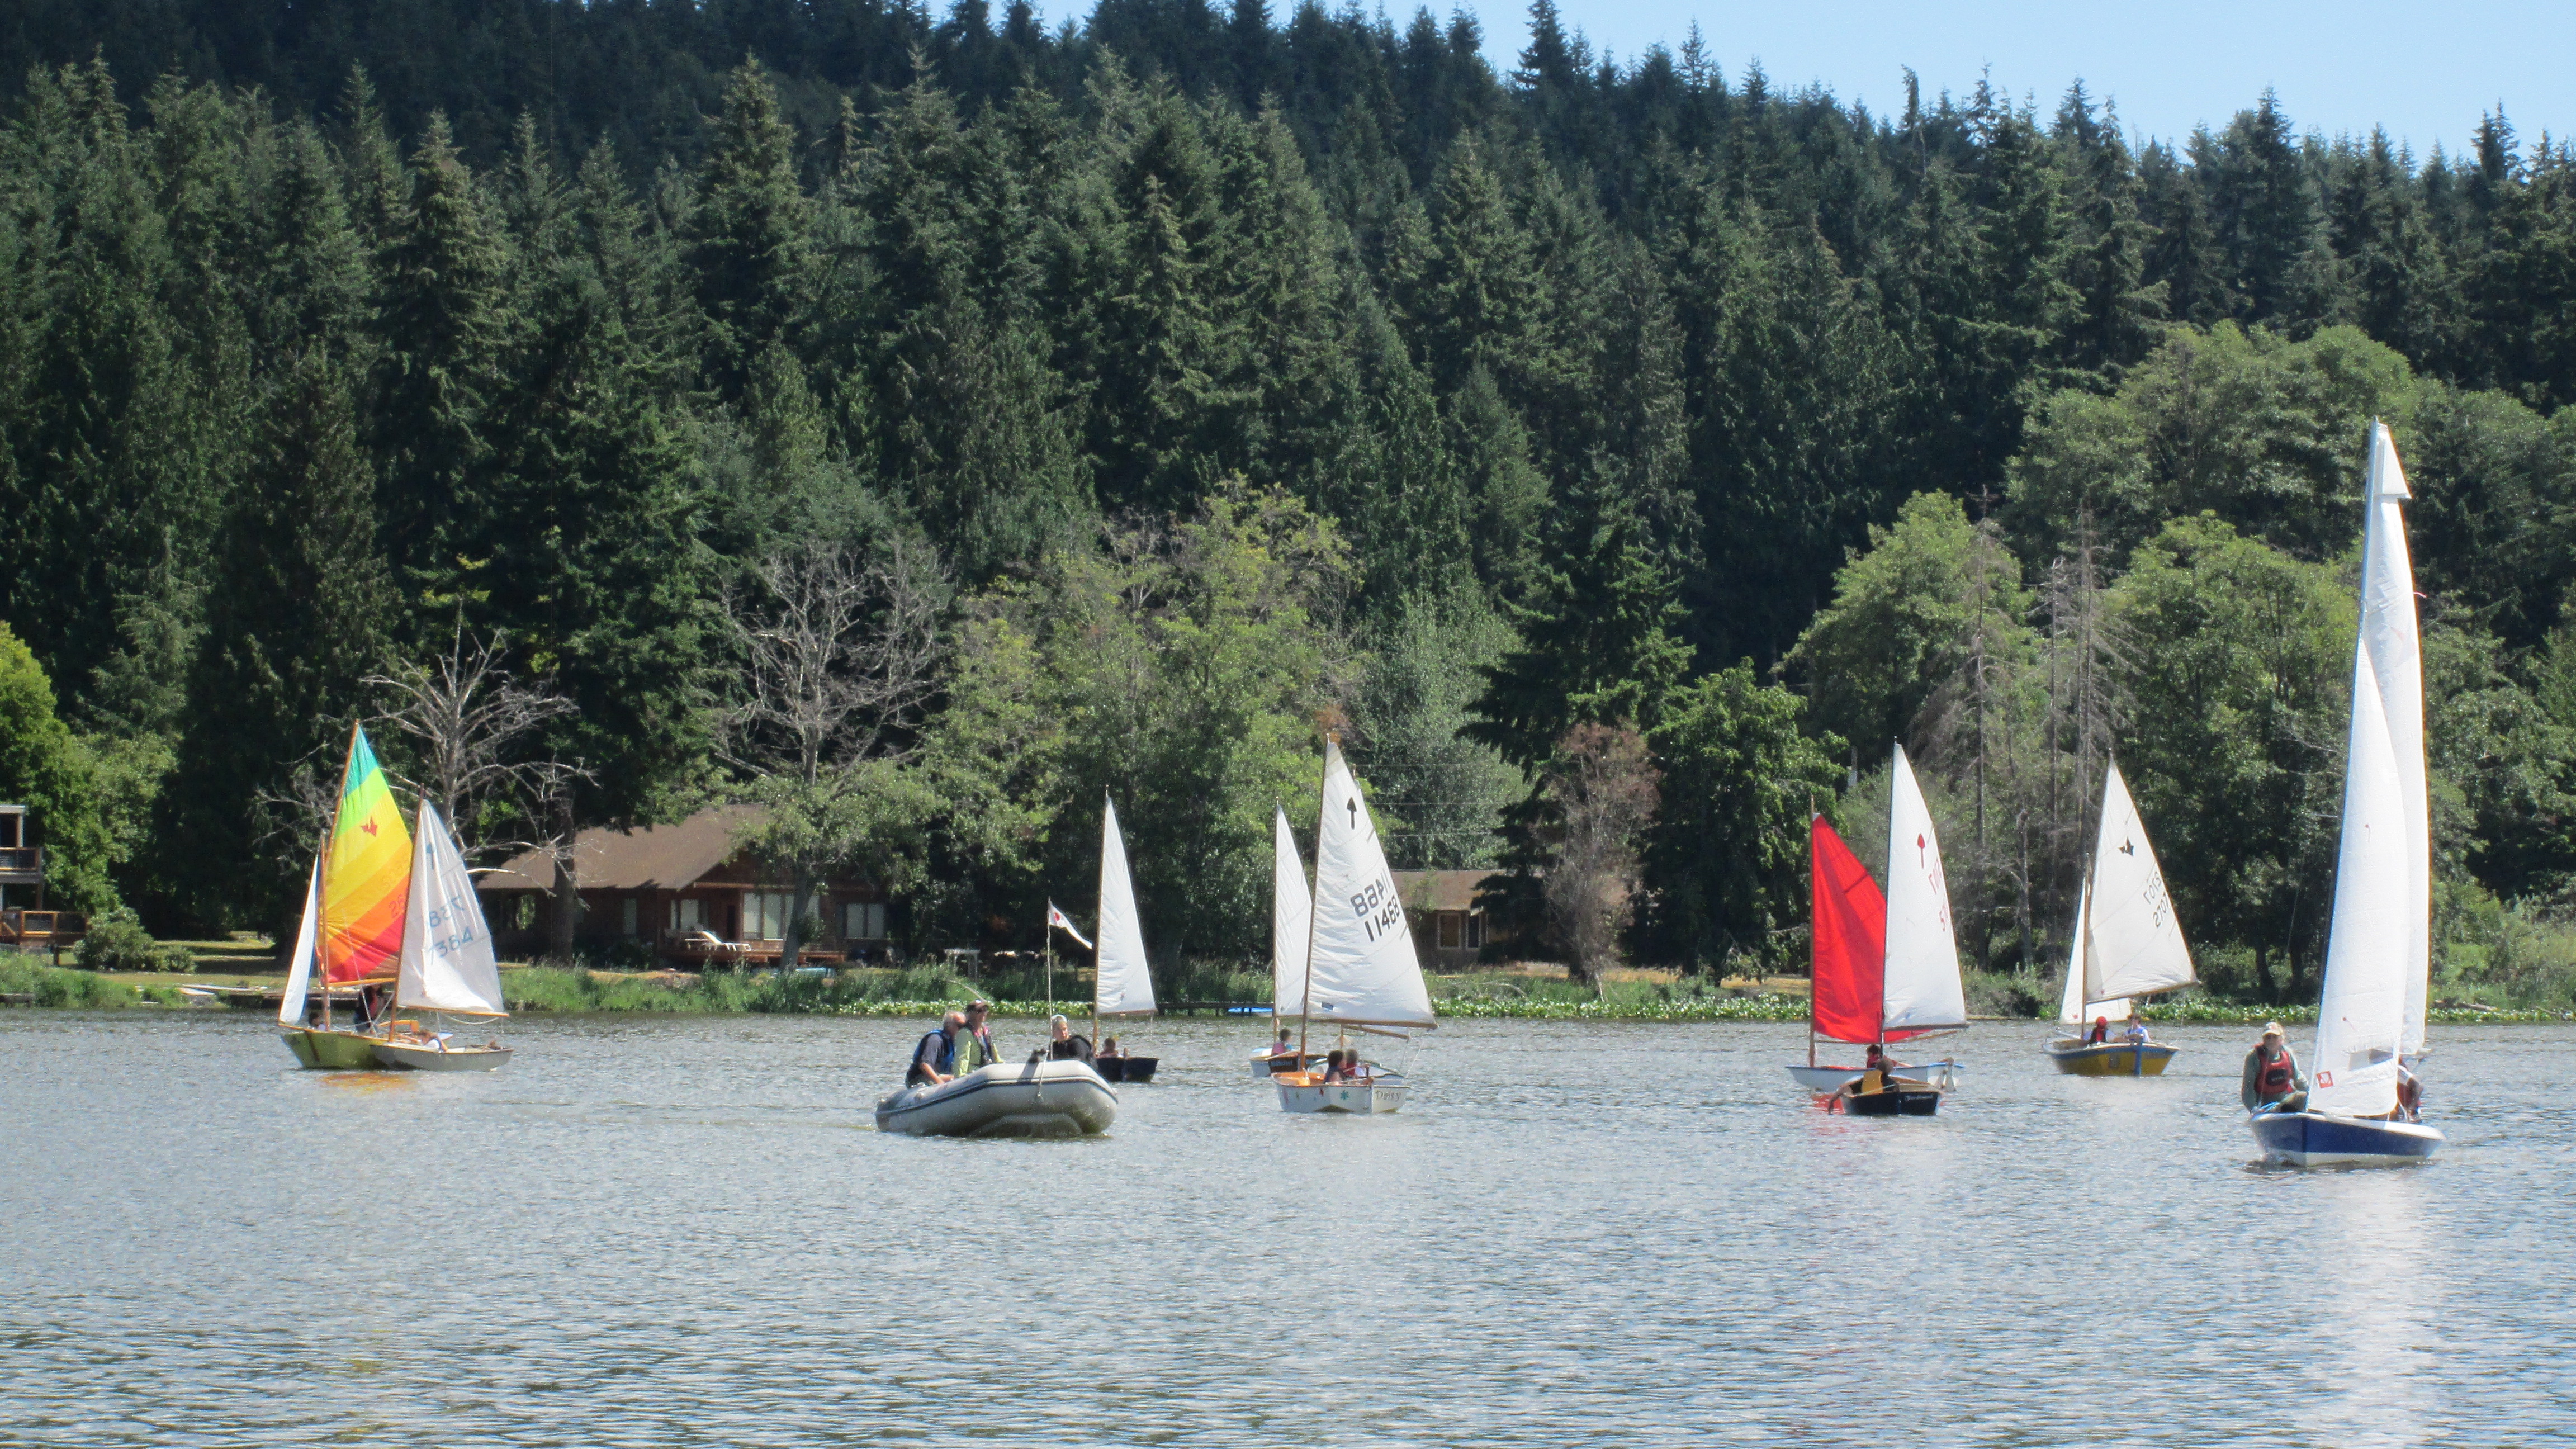 South Whidbey Yacht Club